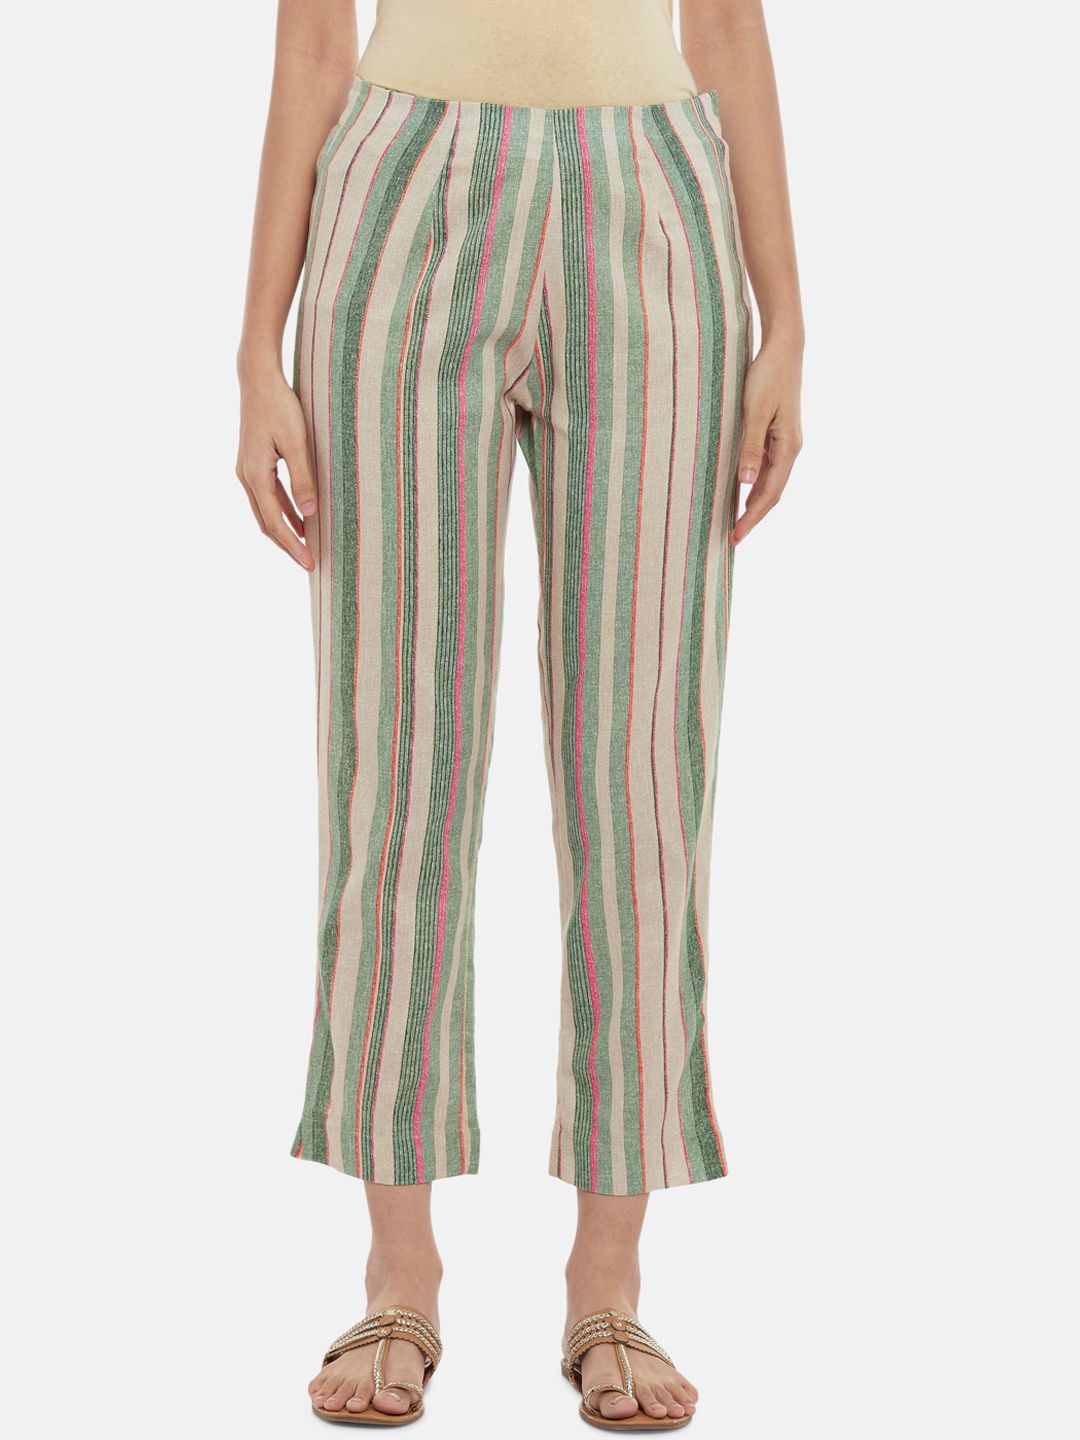 RANGMANCH BY PANTALOONS Women Beige Striped Trousers Price in India